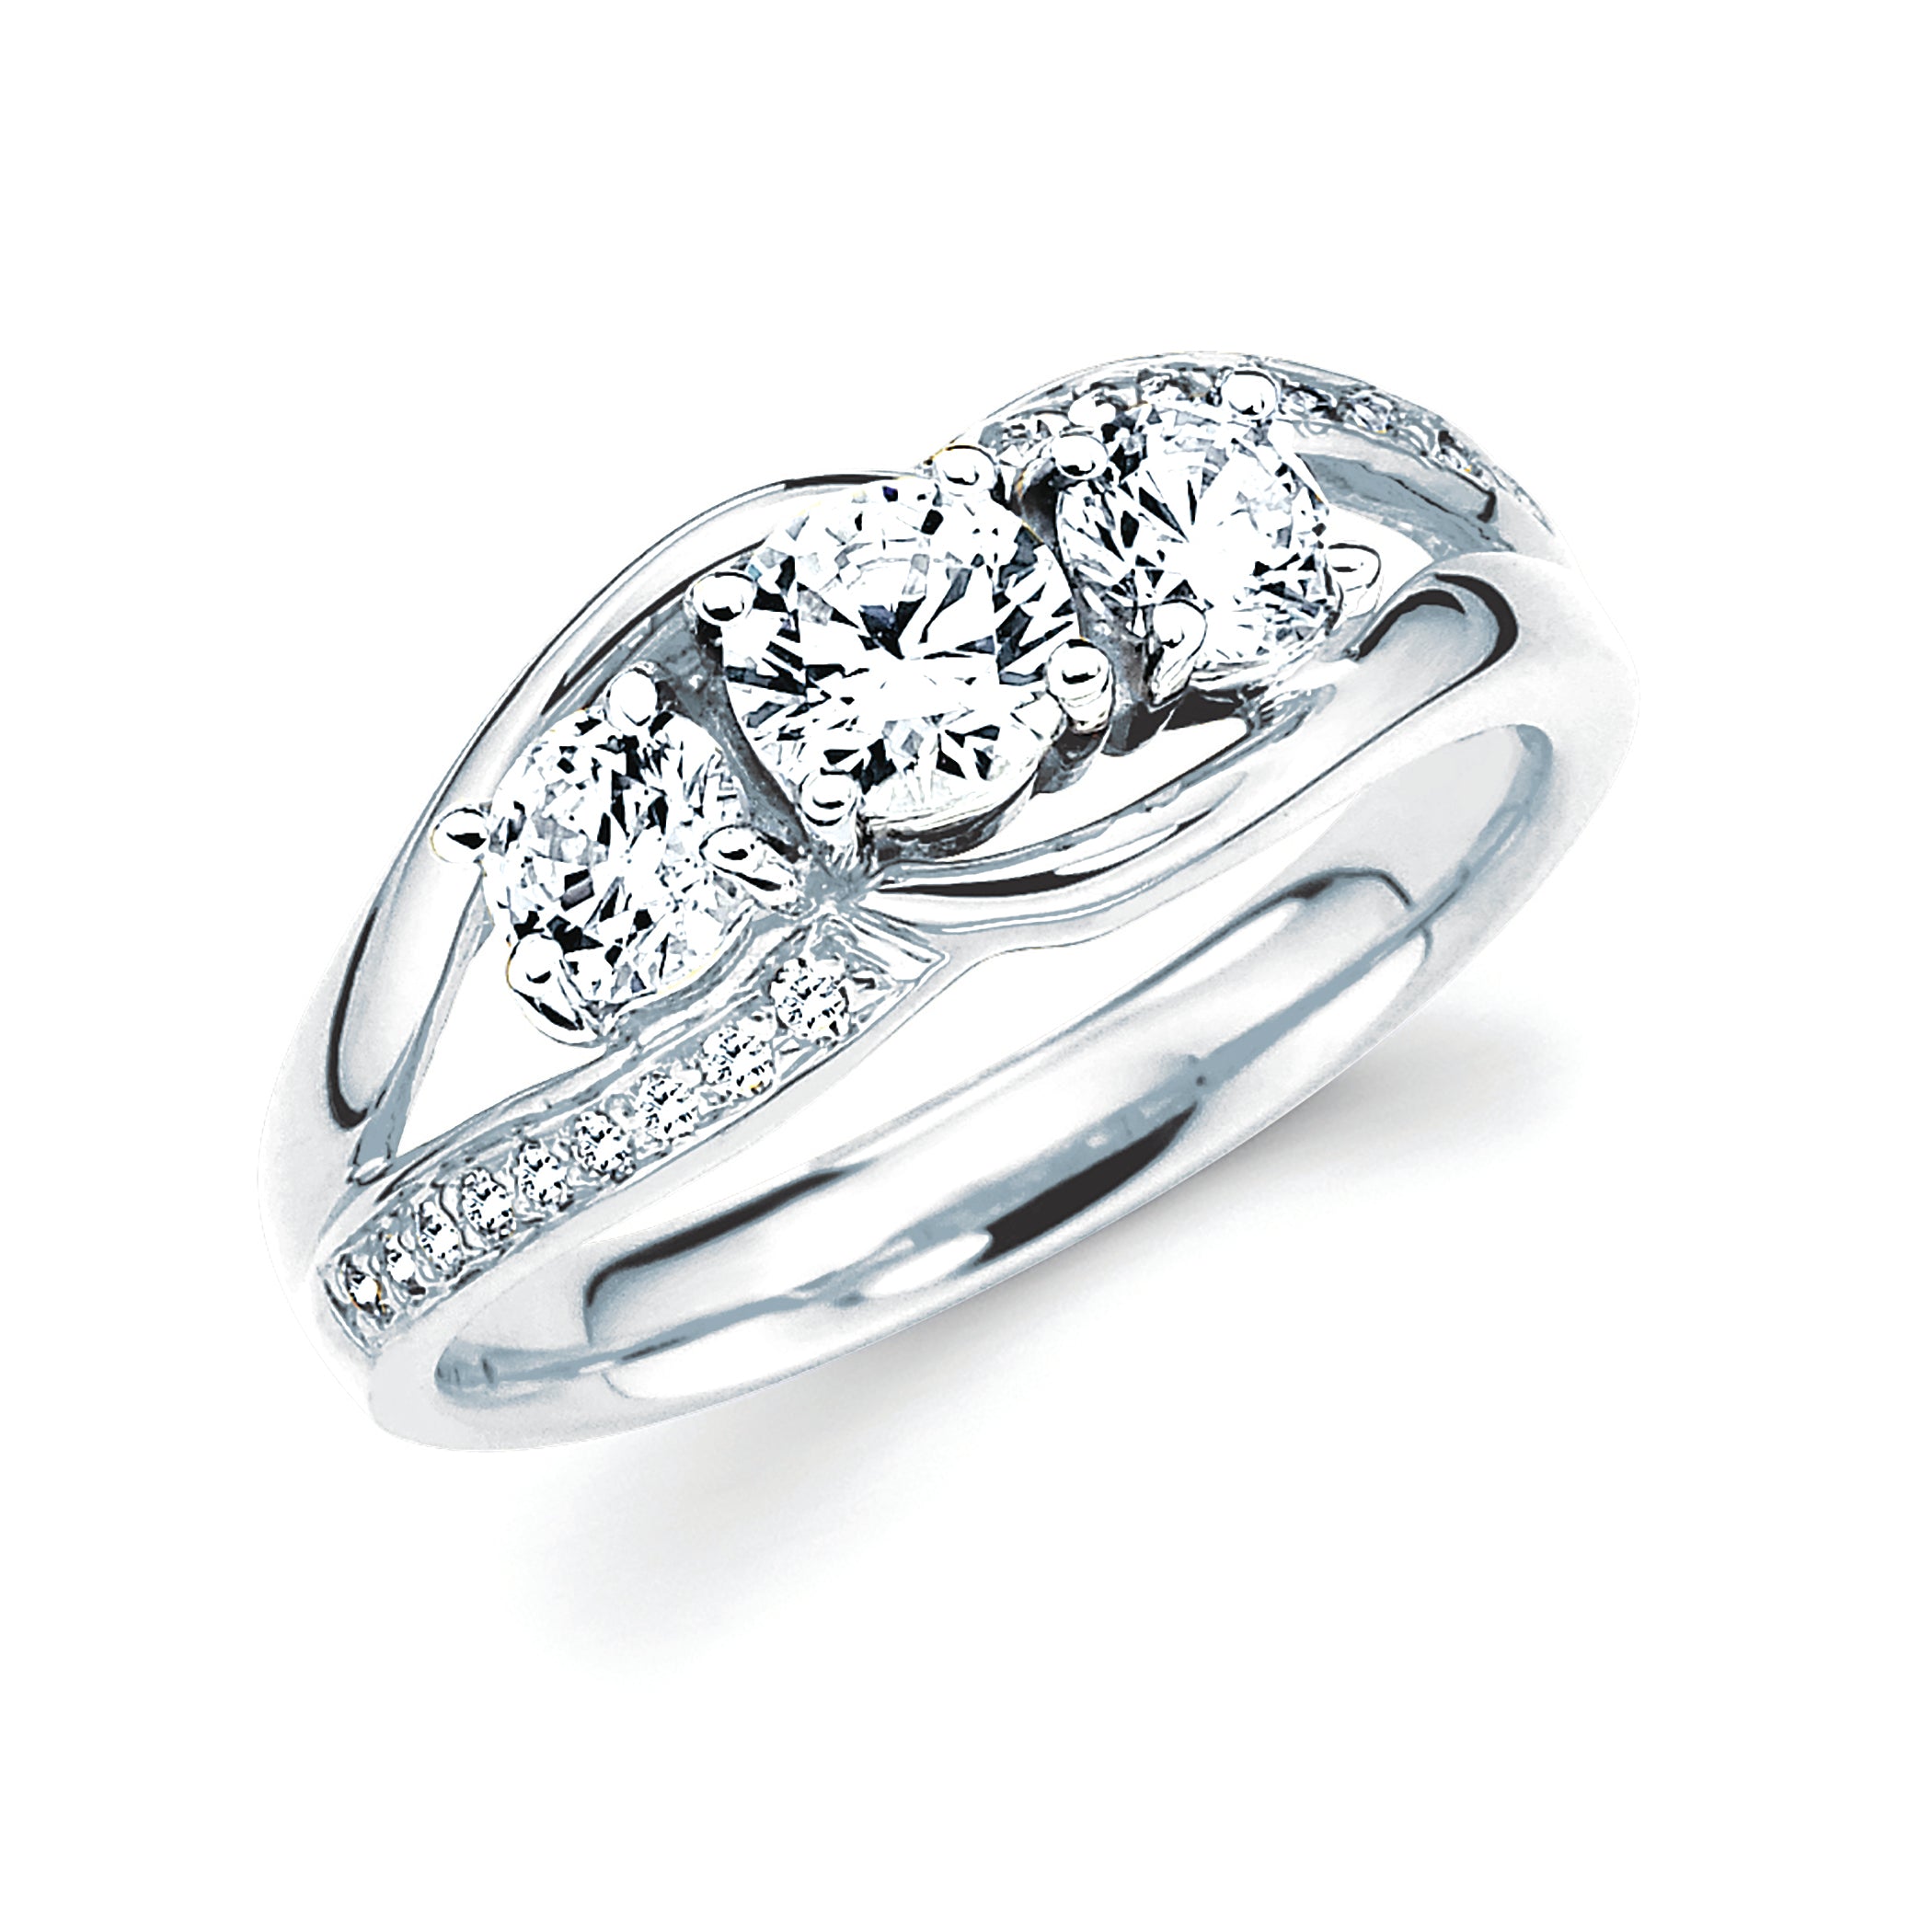 14K 3 Stone Engagement Ring with Split Shank Design and Diamond Melee